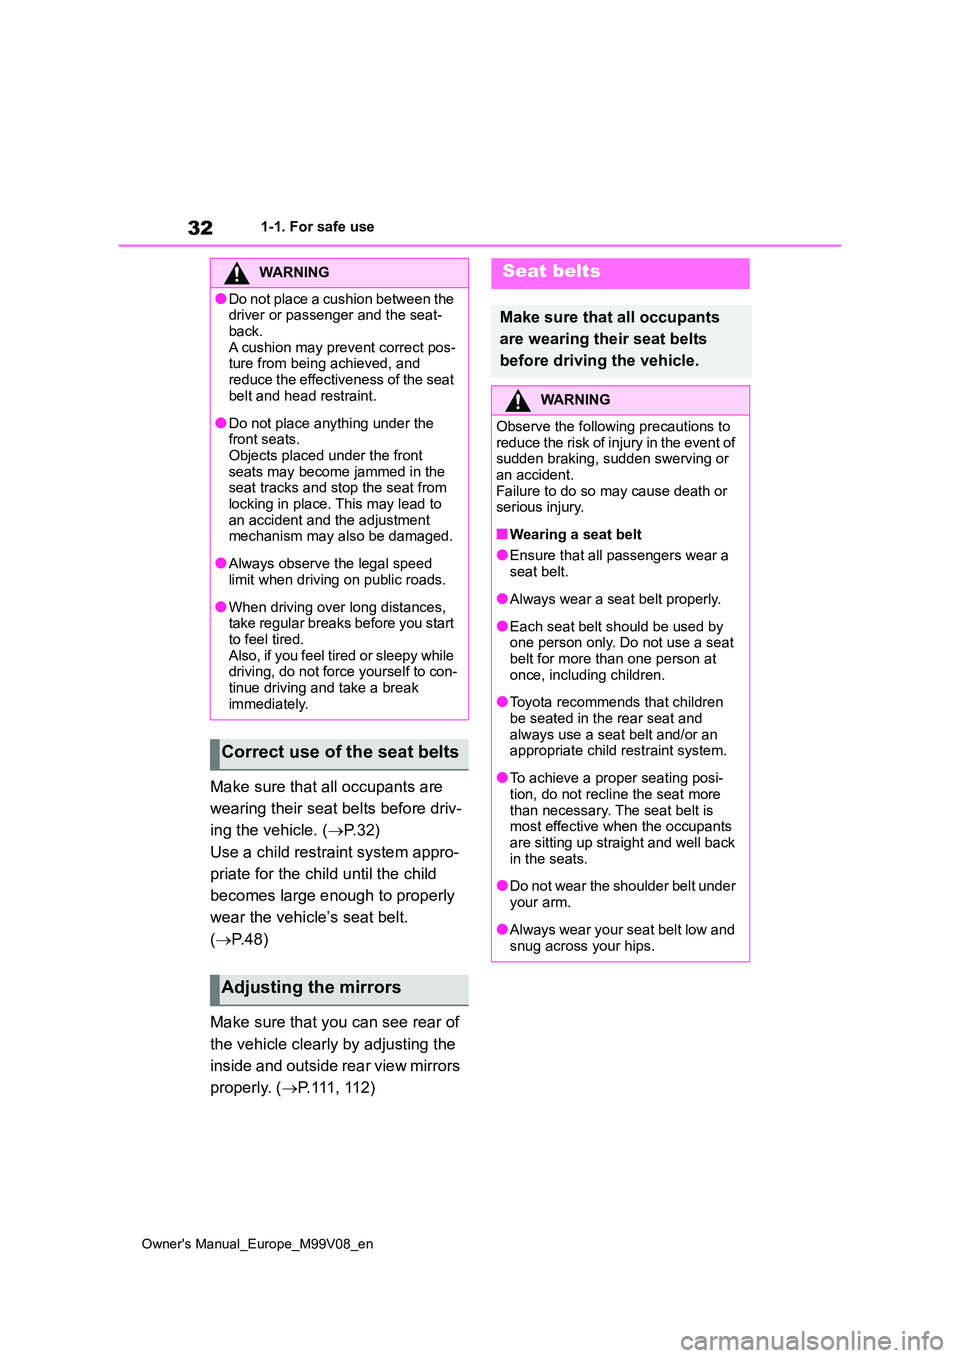 TOYOTA AYGO X 2022  Owners Manual (in English) 32
Owner's Manual_Europe_M99V08_en
1-1. For safe use
Make sure that all occupants are  
wearing their seat belts before driv- 
ing the vehicle. ( P.32) 
Use a child restraint system appro- 
pri